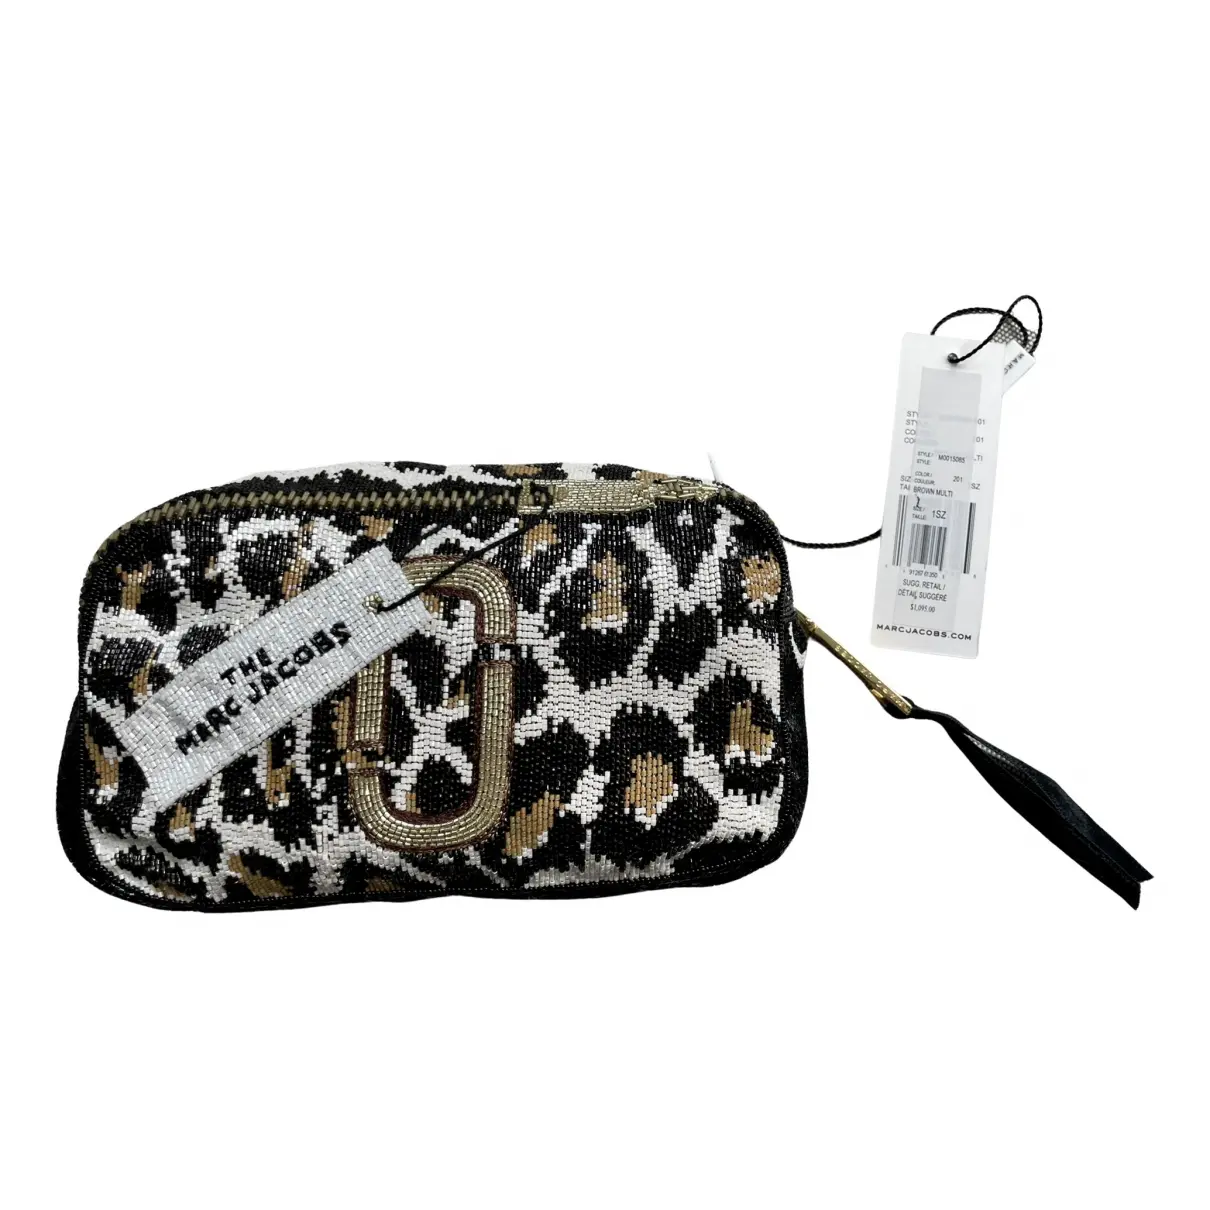 Snapshot leather clutch bag Marc Jacobs